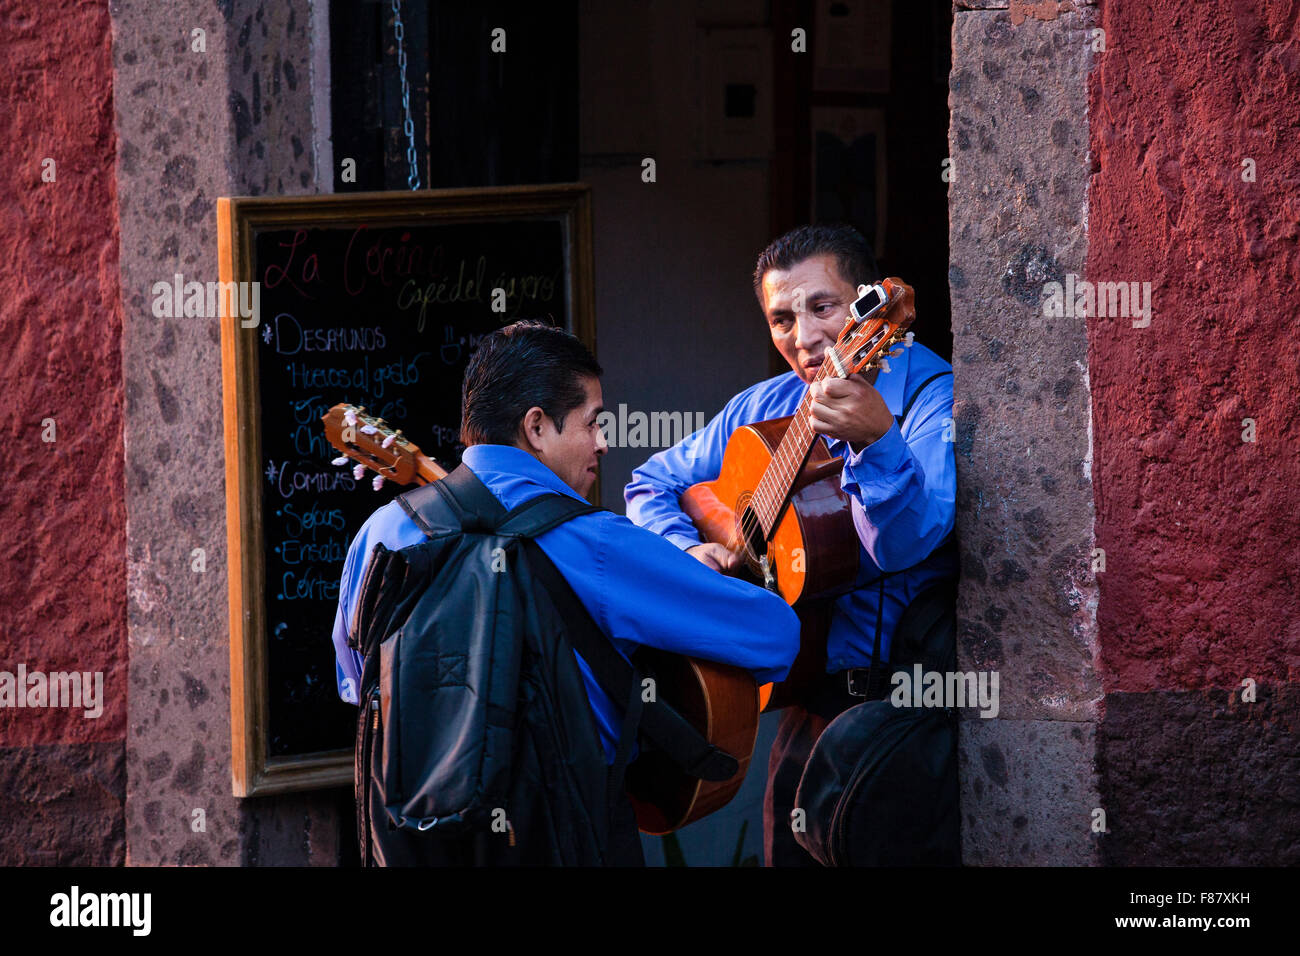 A couple of guitar players rehearse a tune before entering a restaurant in San Miguel de Allende, Mexico. Stock Photo